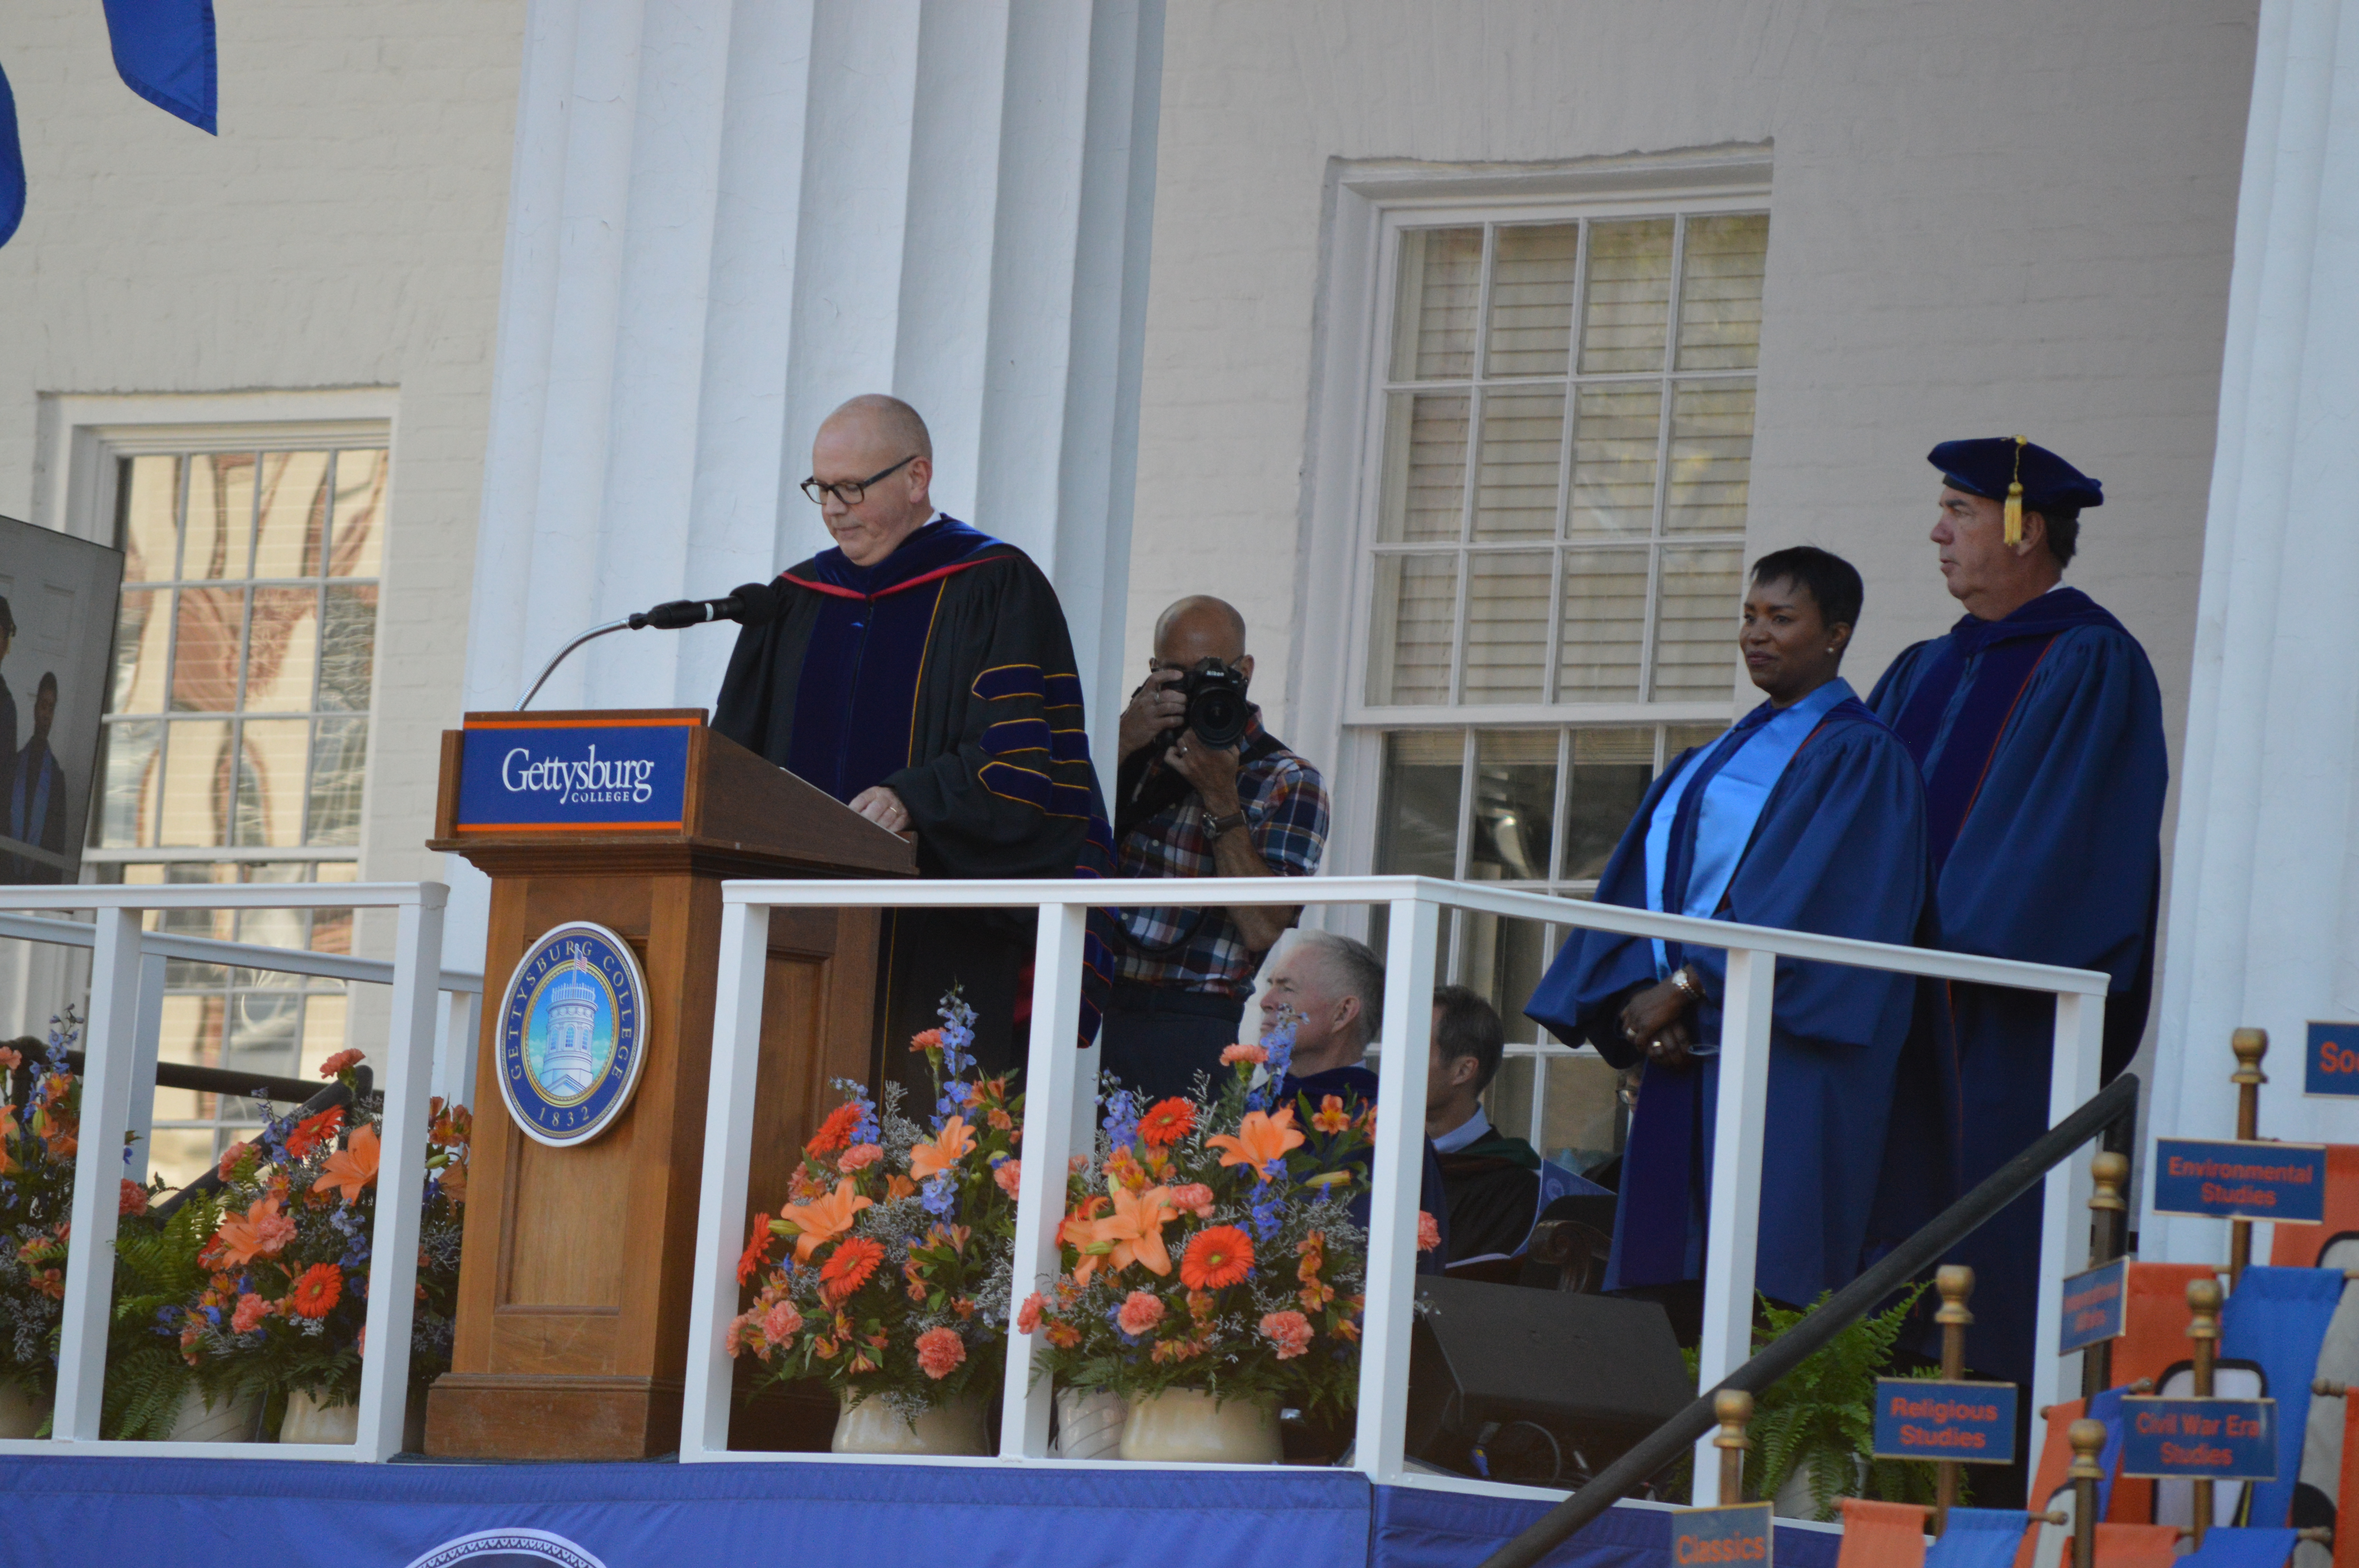 Provost Chris Zappe speaking at Commencement for the Class of 2020 (Photo Maggie Galloway/The Gettysburgian)